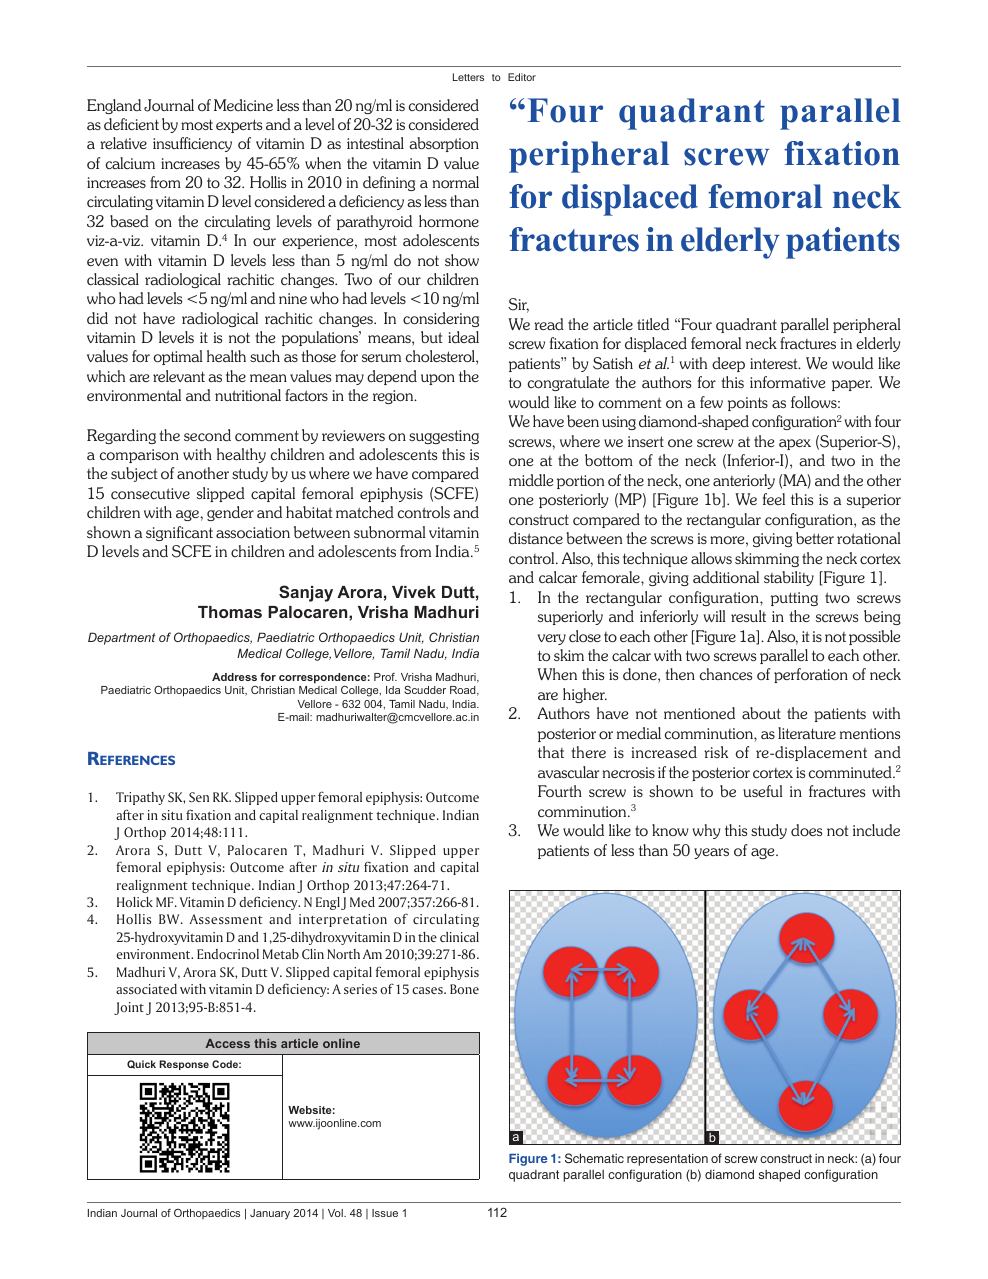 Four Quadrant Parallel Peripheral Screw Fixation For Displaced Femoral Neck Fractures In Elderly Patients Topic Of Research Paper In Clinical Medicine Download Scholarly Article Pdf And Read For Free On Cyberleninka Reunion (2020) online ελληνικοί υπότιτλοι. cyberleninka